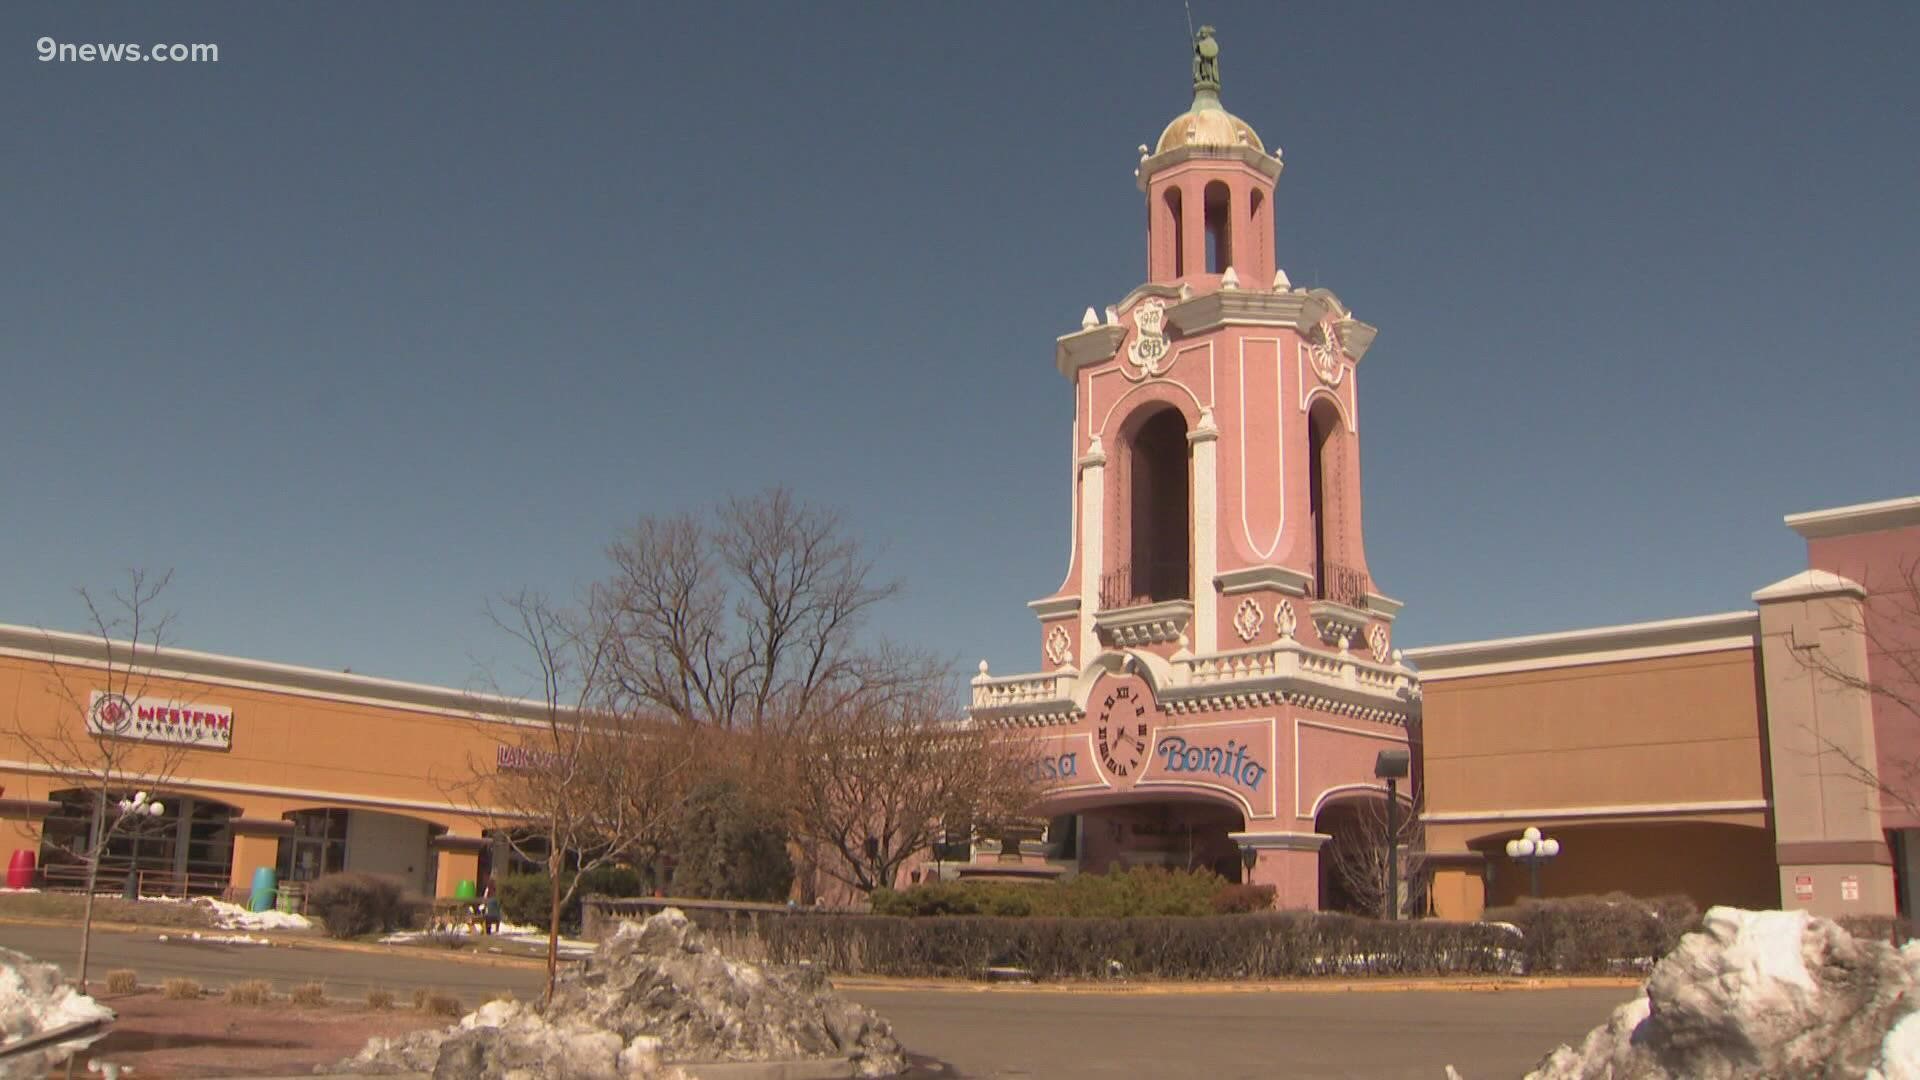 A group called Save Casa Bonita had filed an objection to the sale, but withdrew it earlier this week.